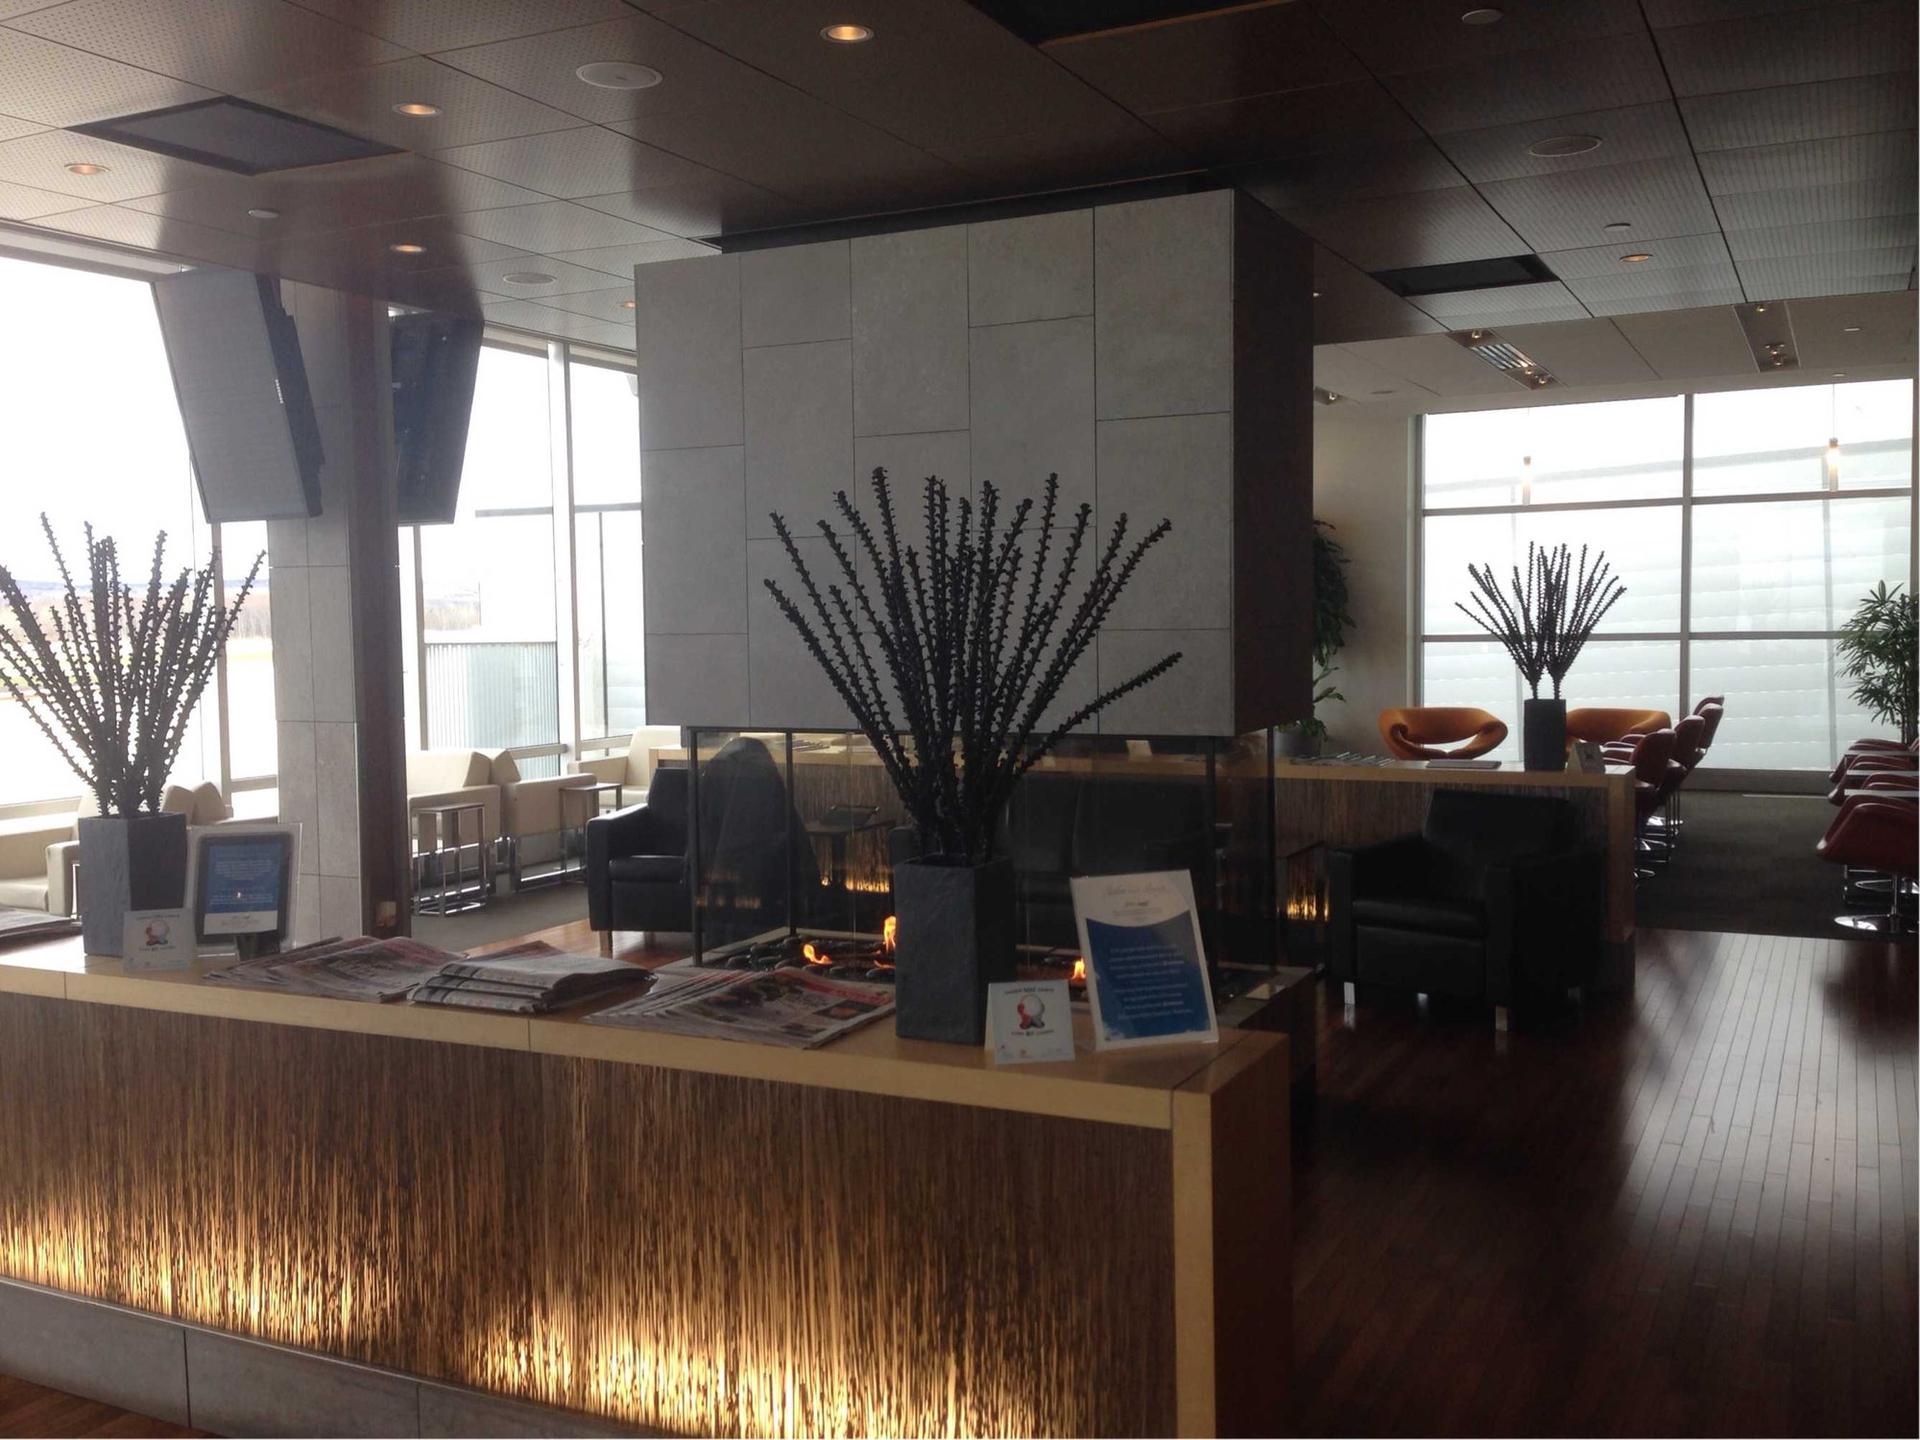 VIP Lounge by Club Med image 1 of 16